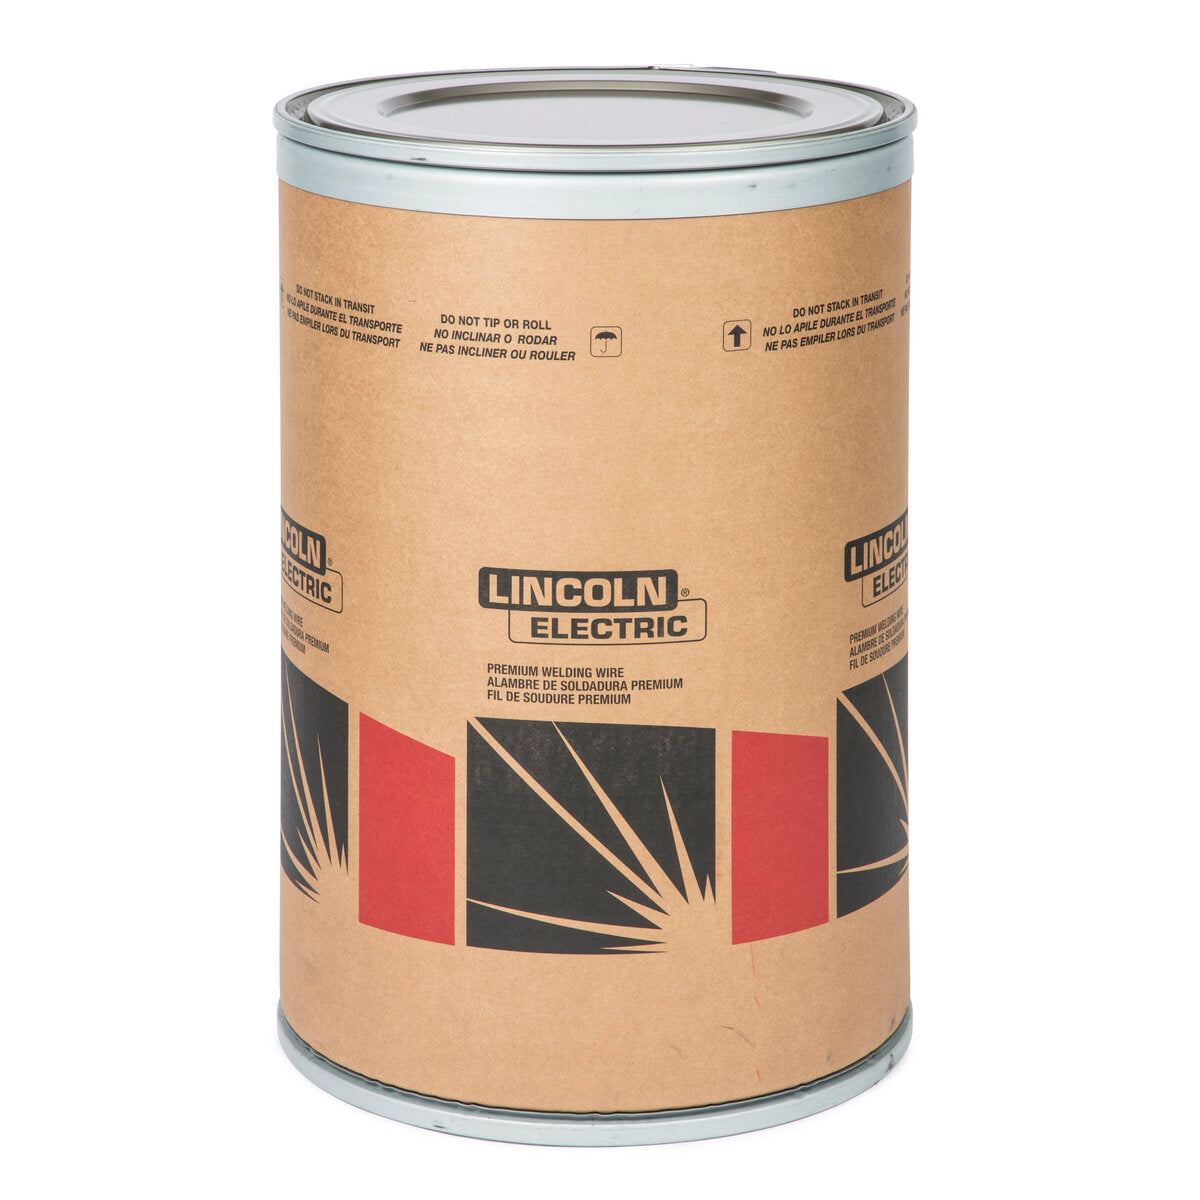 Lincoln Electric - Techalloy® 625 Submerged Arc (SAW) Wire, 1/8 in, 500 lb Speed Feed® Drum - SA625125692